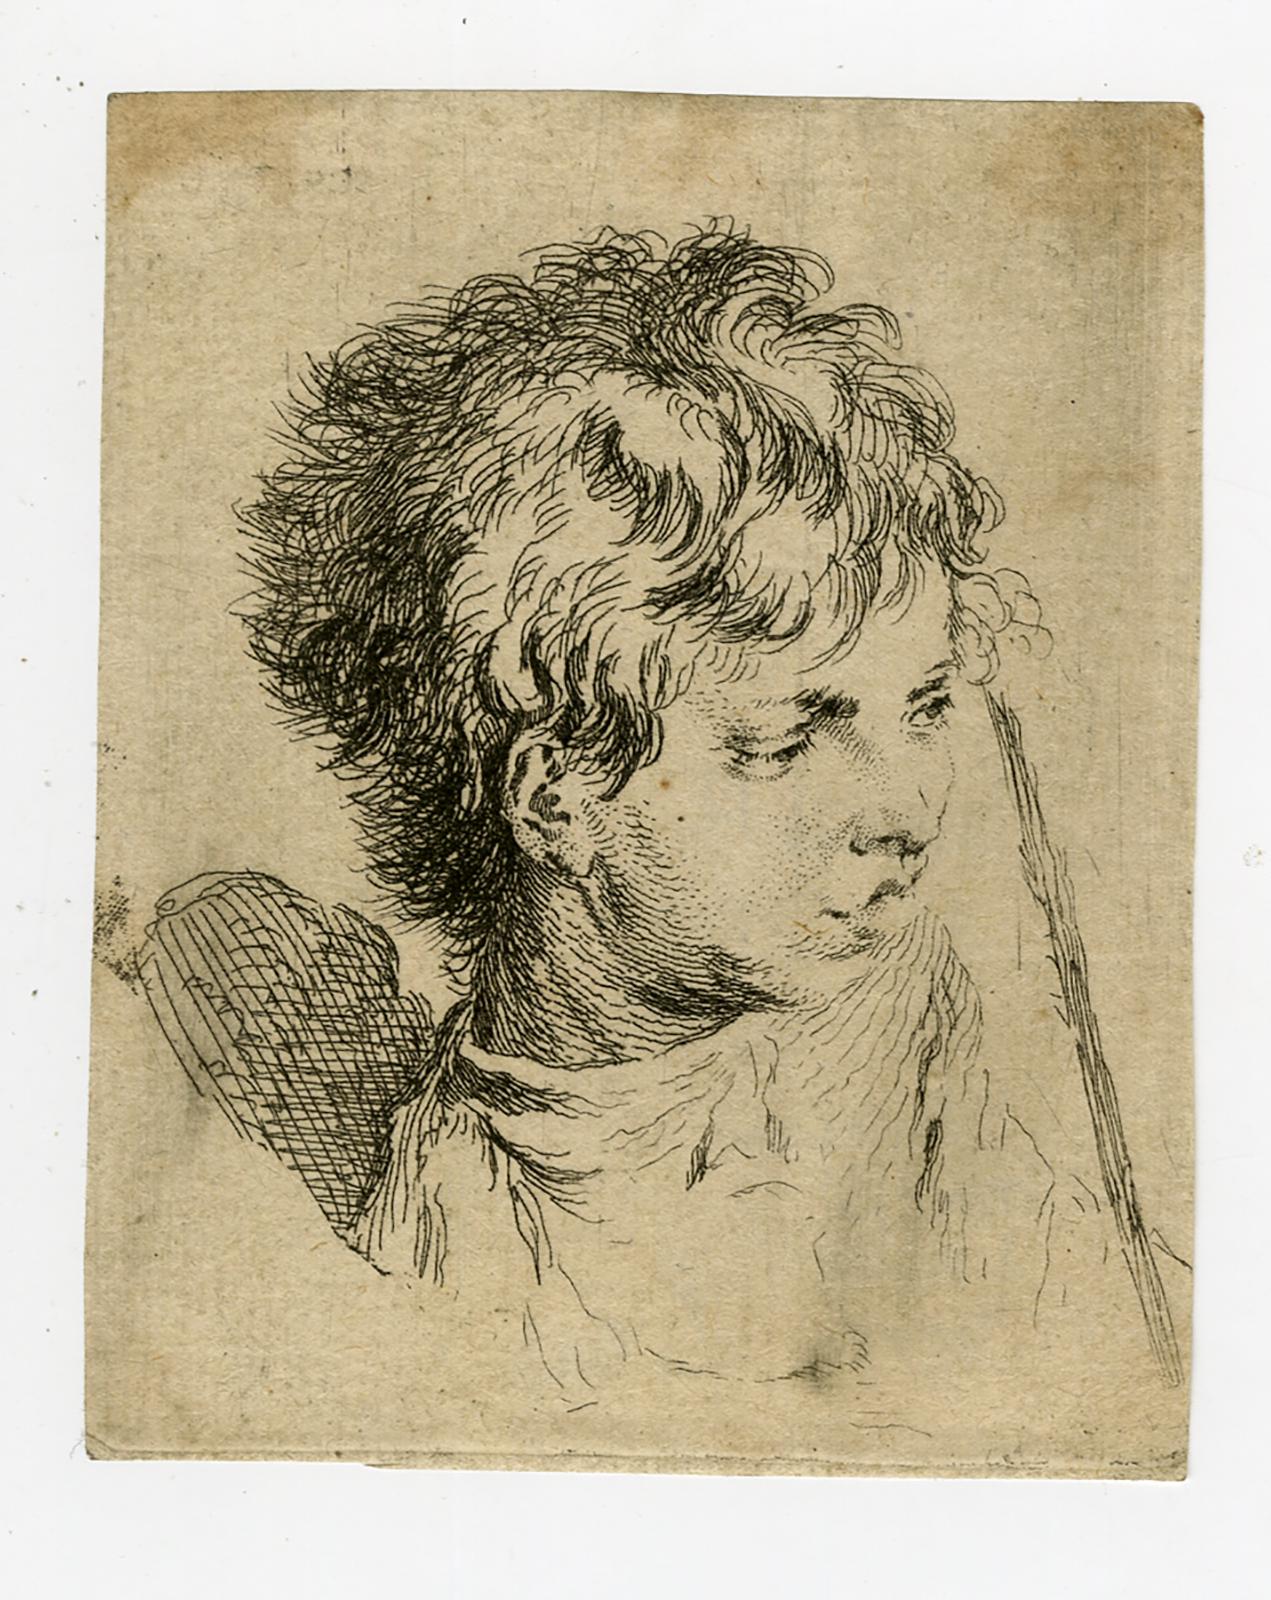 Jacques-Philippe Le Bas Print - Head of a boy by Jacques Philippe le Bas - Etching - 18th Century